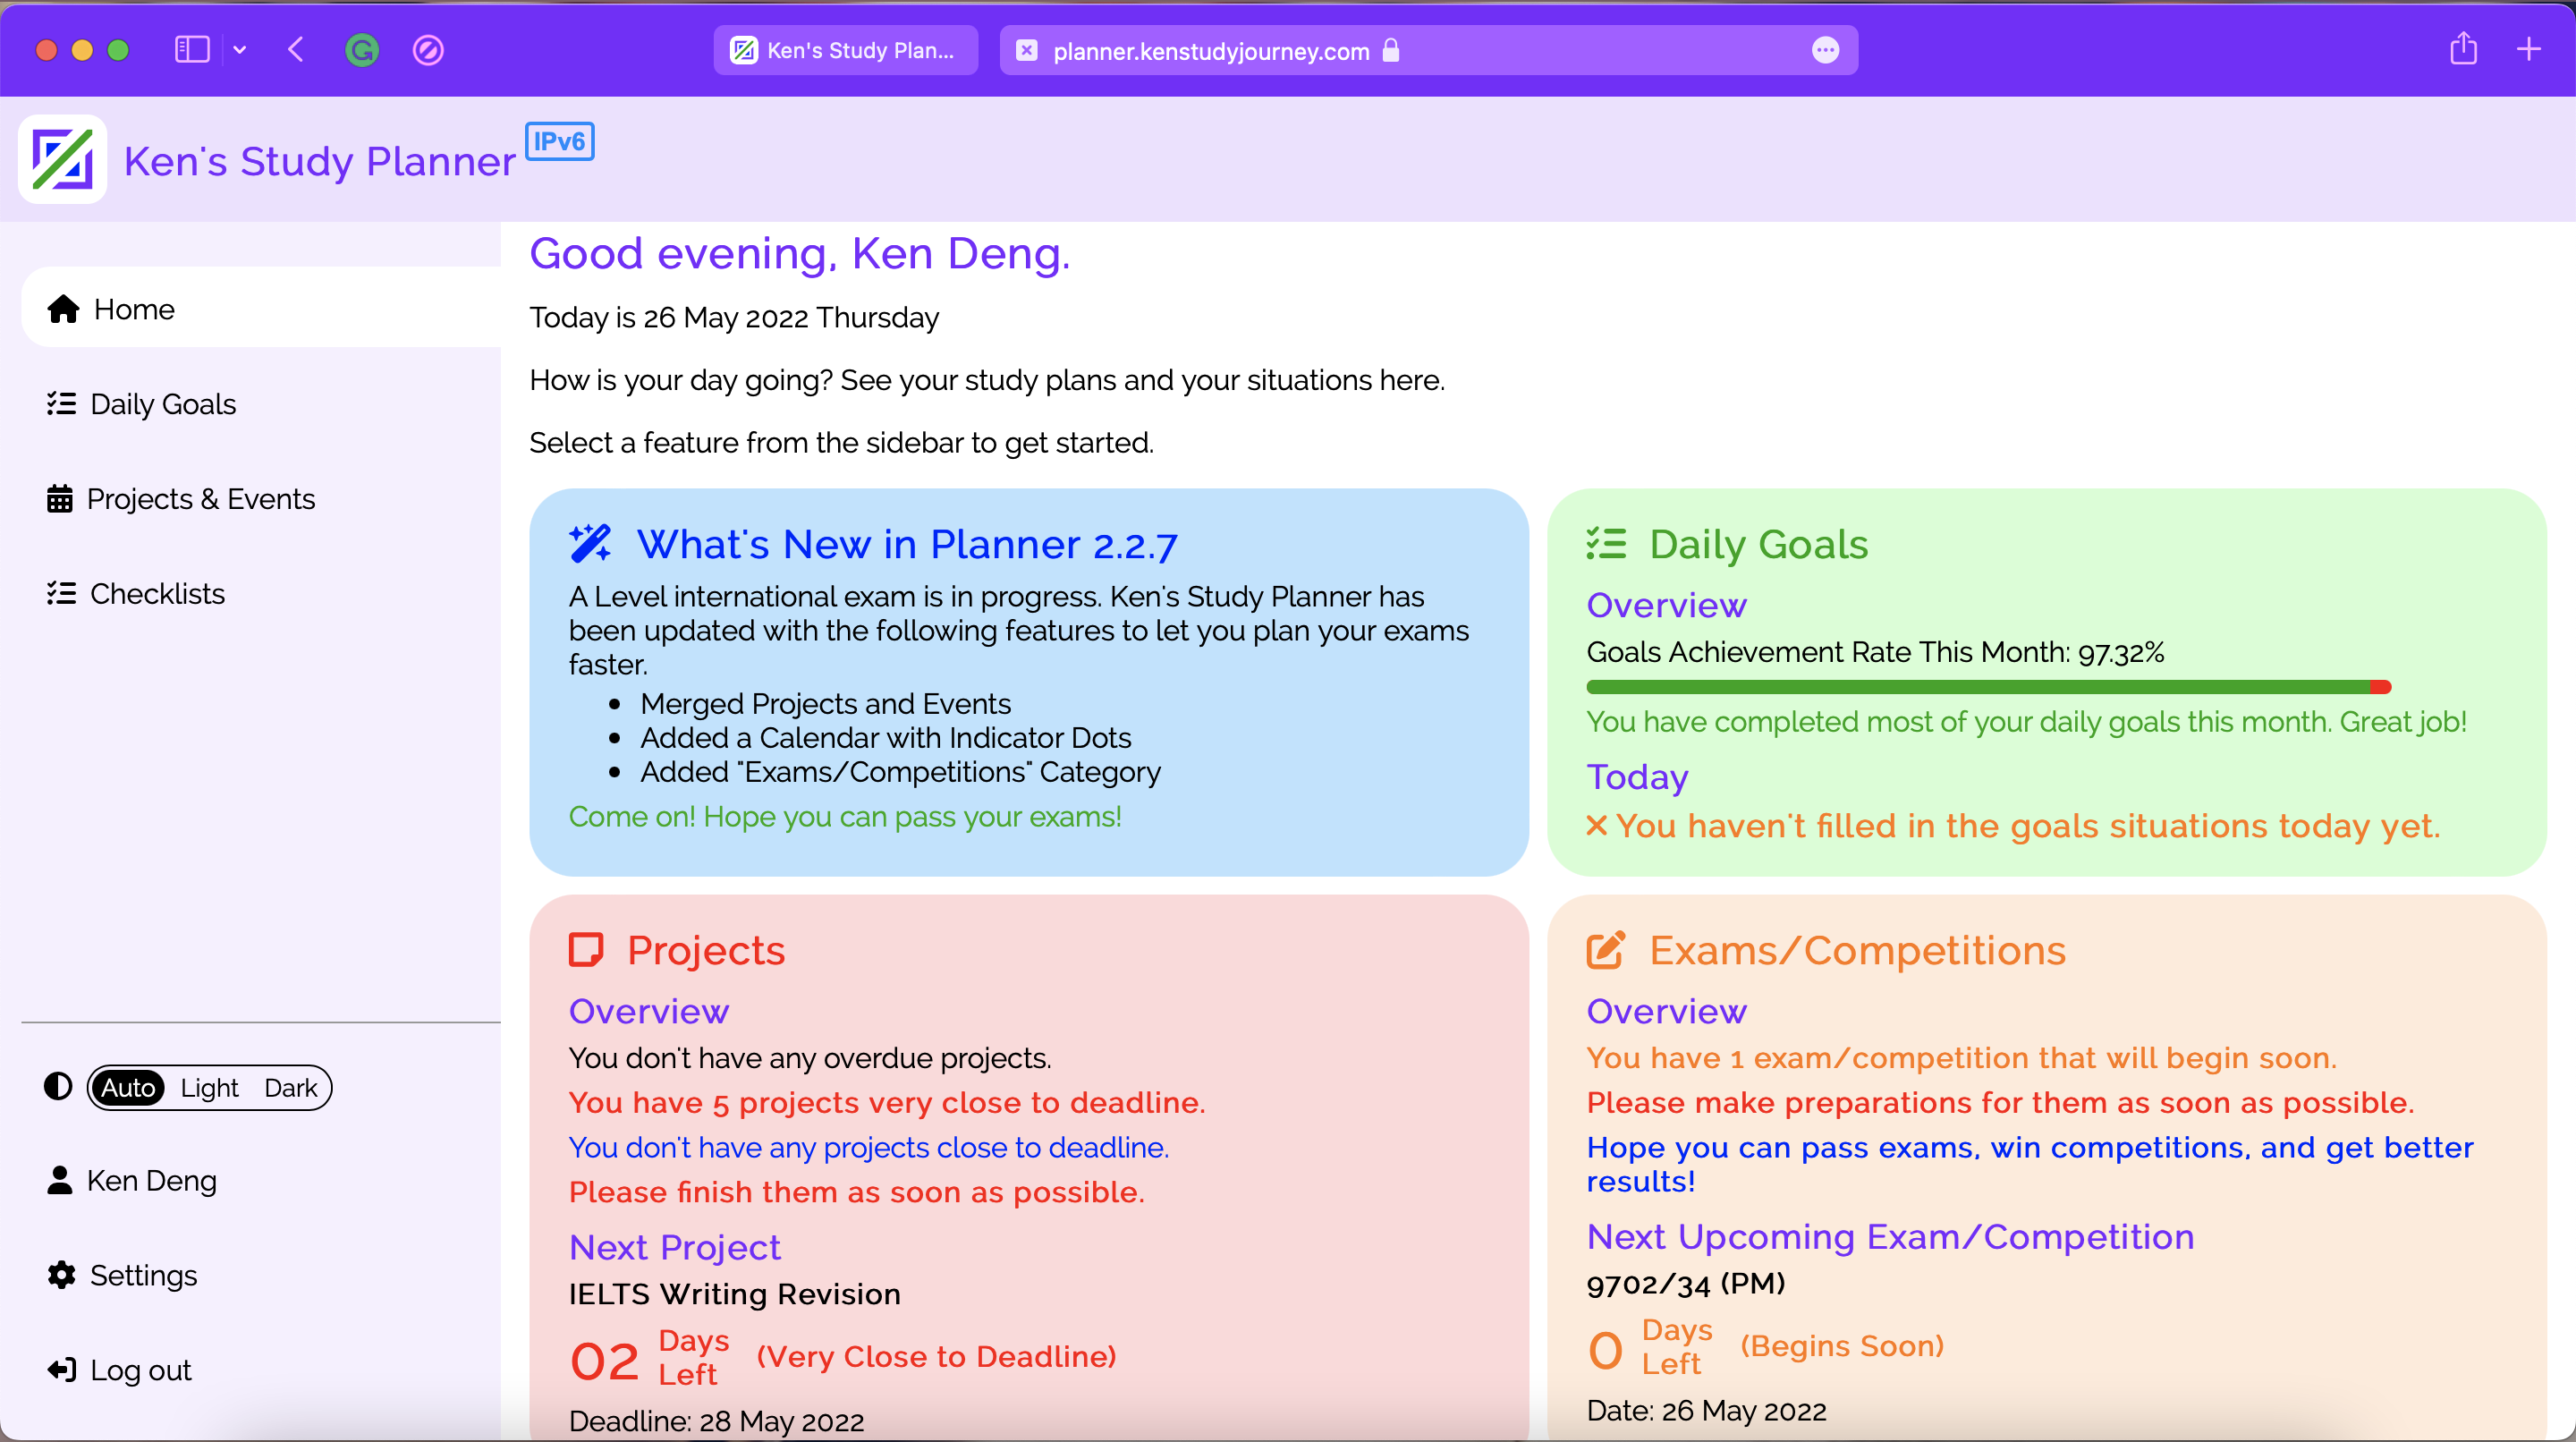 Ken's Study Planner Home Page